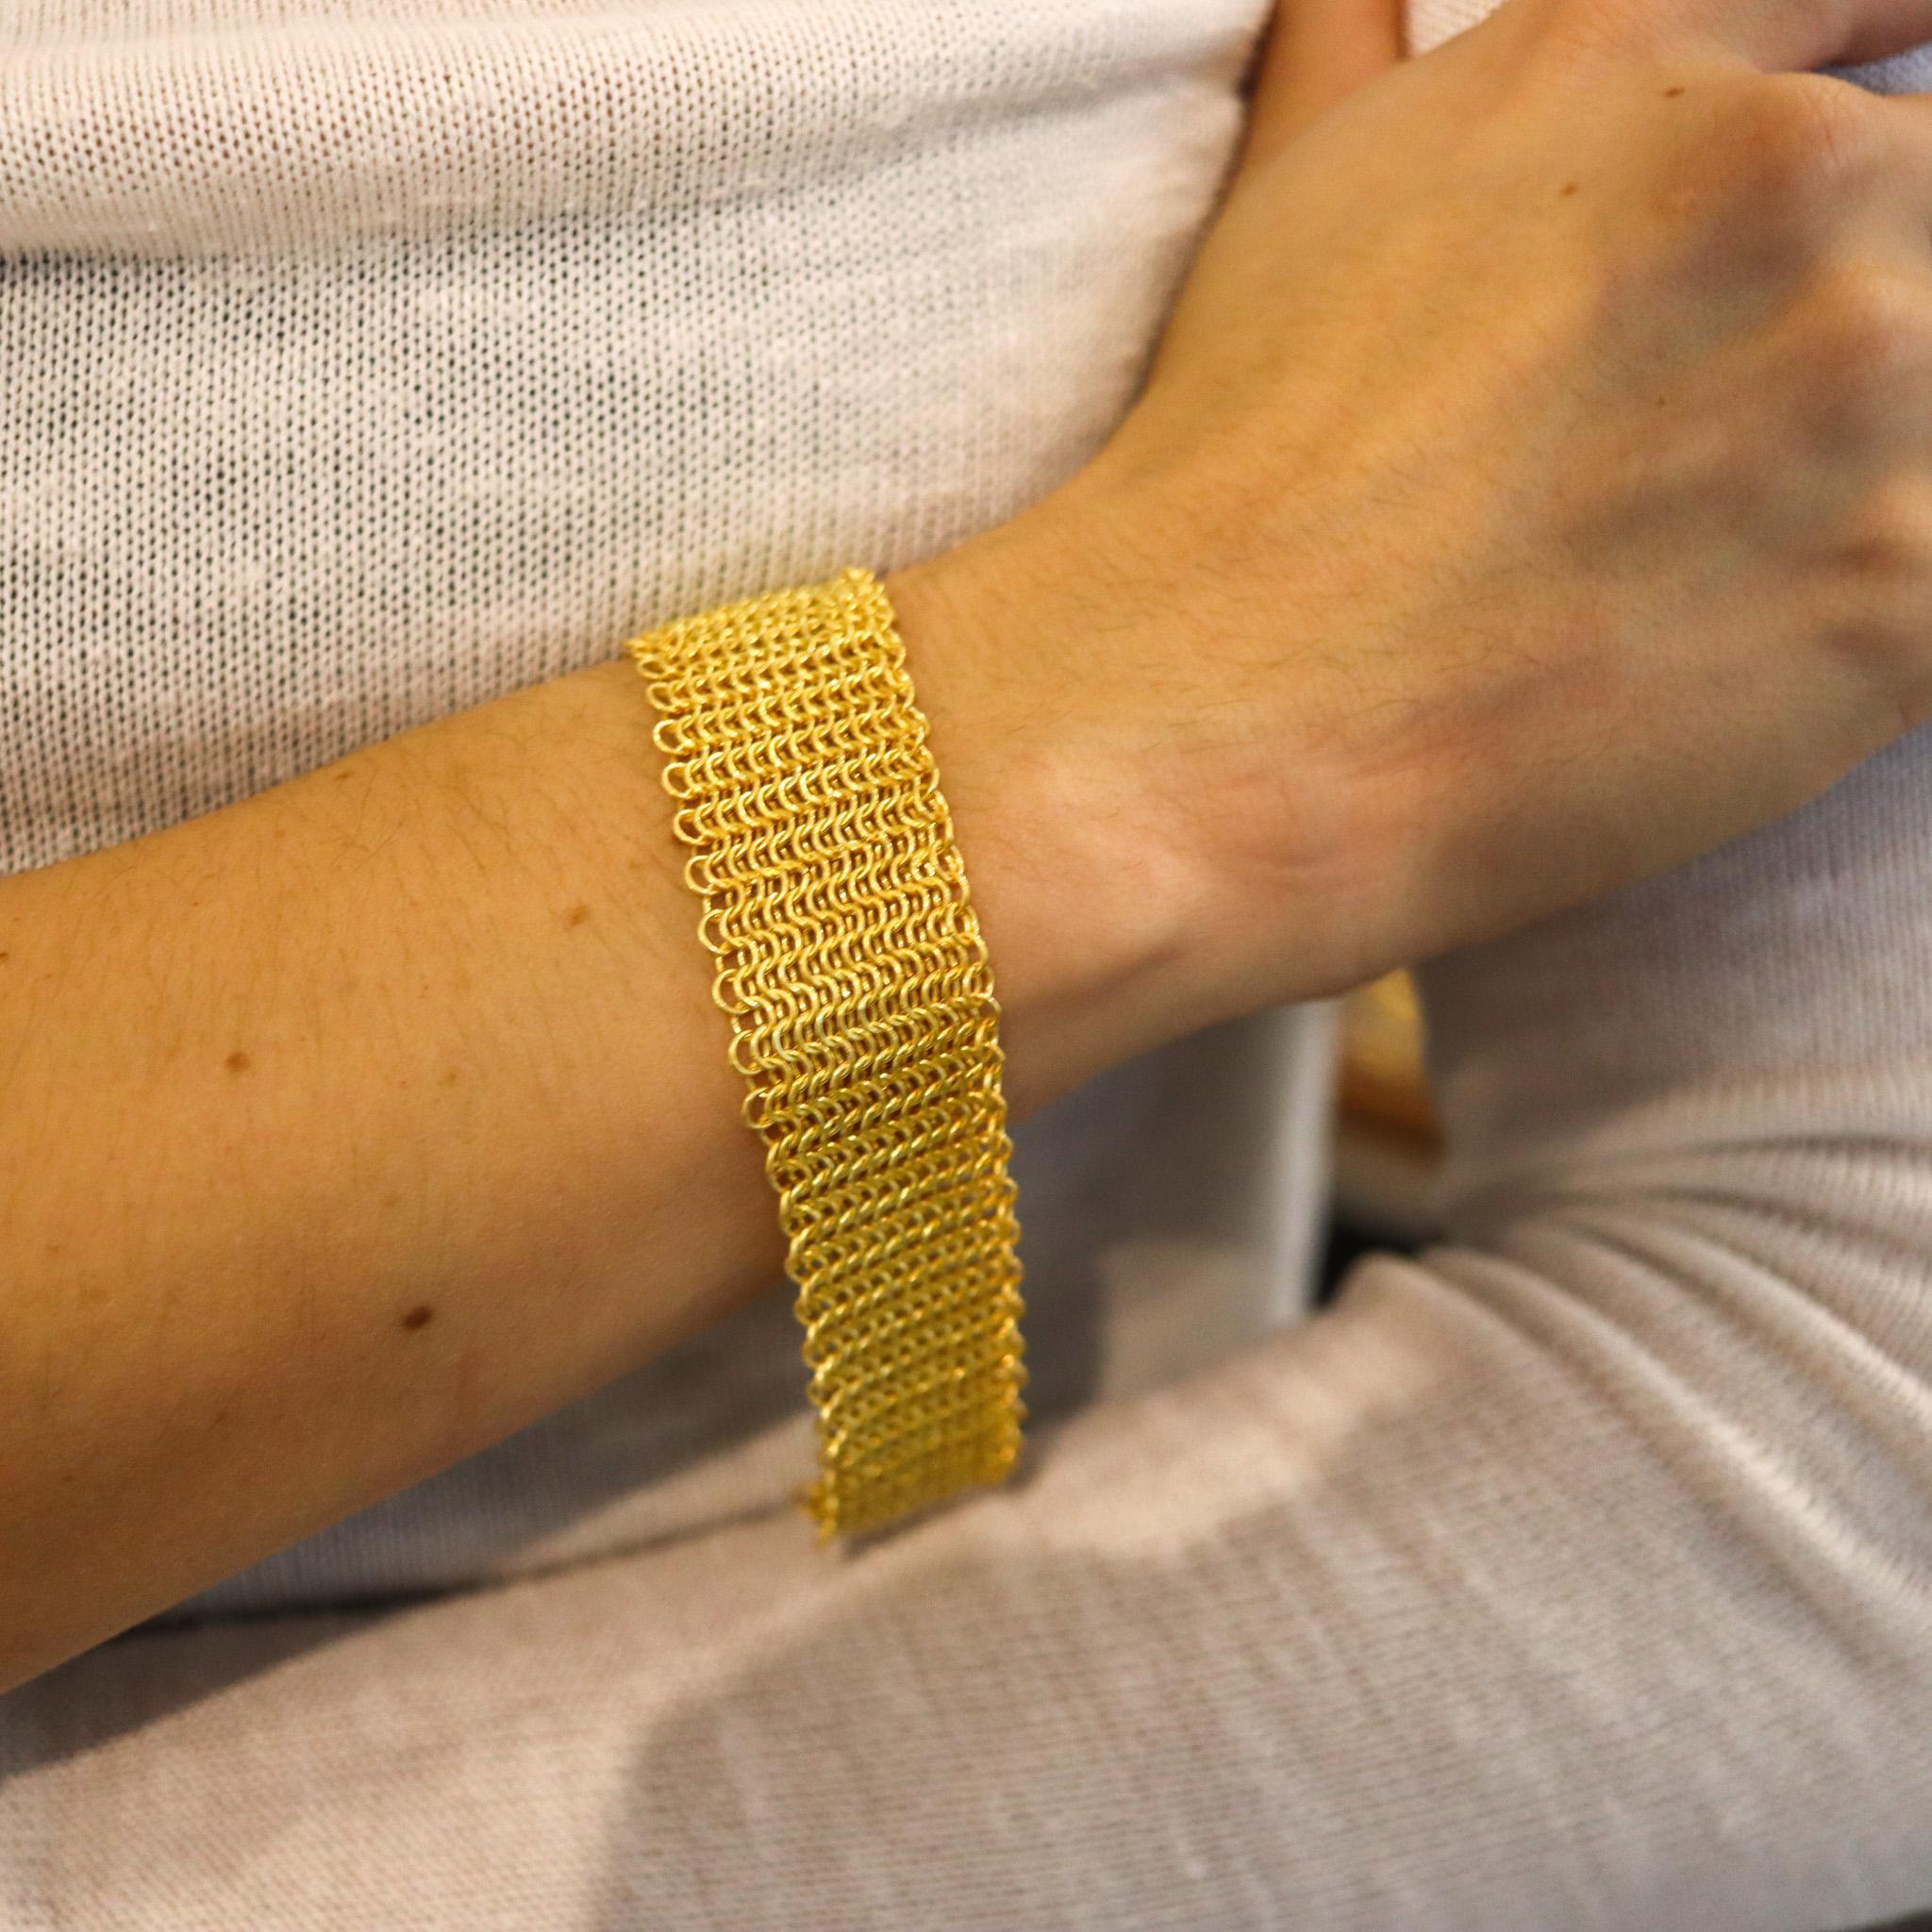 Mesh bracelet designed by Elsa Peretti (1940-2019) for Tiffany & Co.

This flexible mesh bracelet, is one of the iconic Peretti's designs, that she created for the Tiffany Studios, back in the 1980. It was crafted with a very sportive look made up